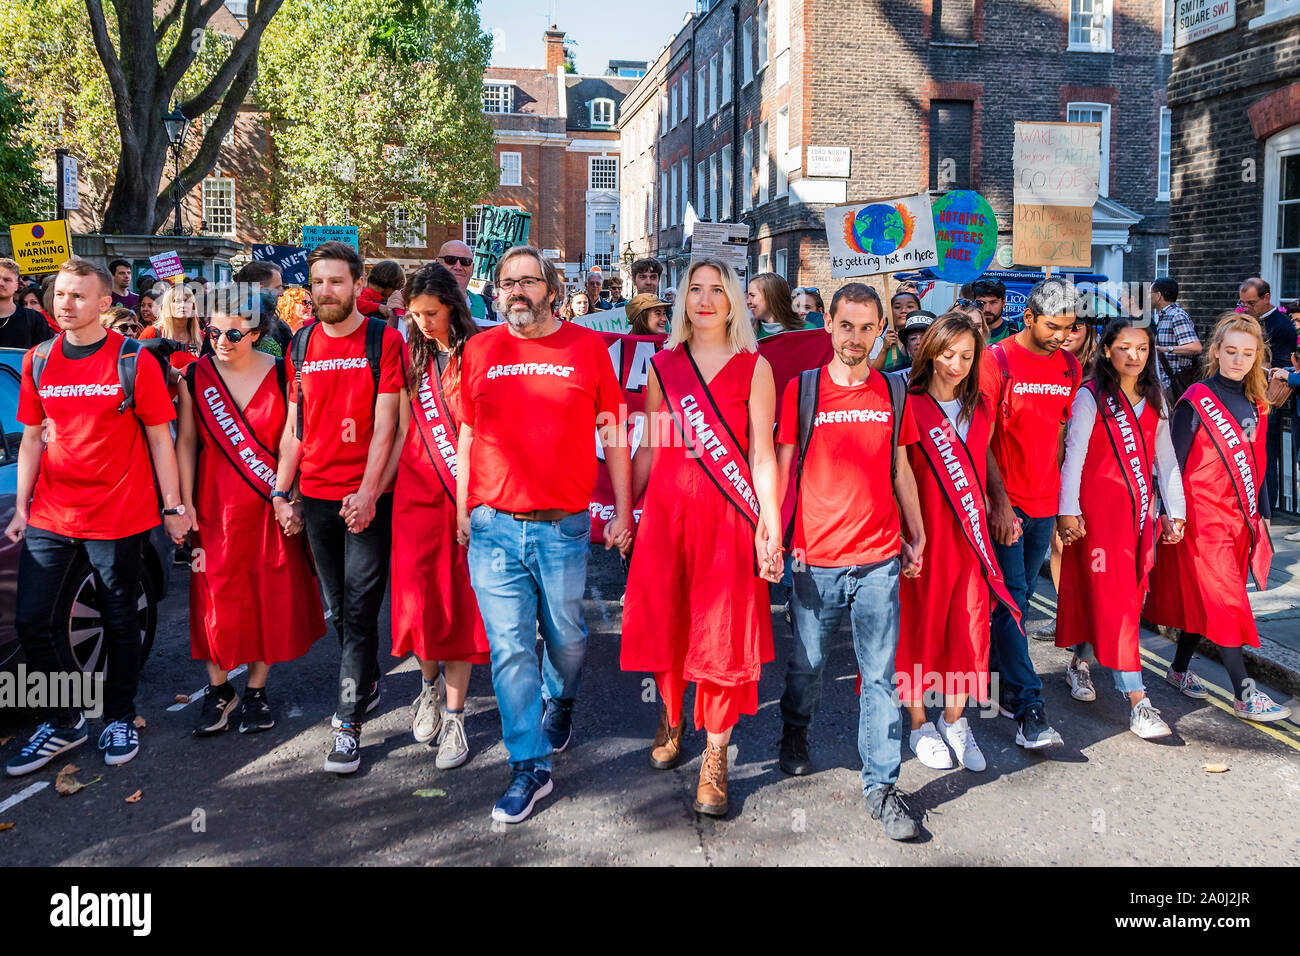 London, UK. 20th Sep, 2019. Greenpeace repriese their red dresses - A general strike for Climate Justice, attended by school children, students and adults, is organised by Extinction Rebellion, Greenpeace, Save the Earth and other groups campaigning for the environment. They are again highlighting the climate emergency, with time running out to save the planet from a climate disaster. This is part of the ongoing ER and other protests to demand action by the UK Government on the 'climate crisis'. The action is part of an international co-ordinated protest. Credit: Guy Bell/Alamy Live News Stock Photo